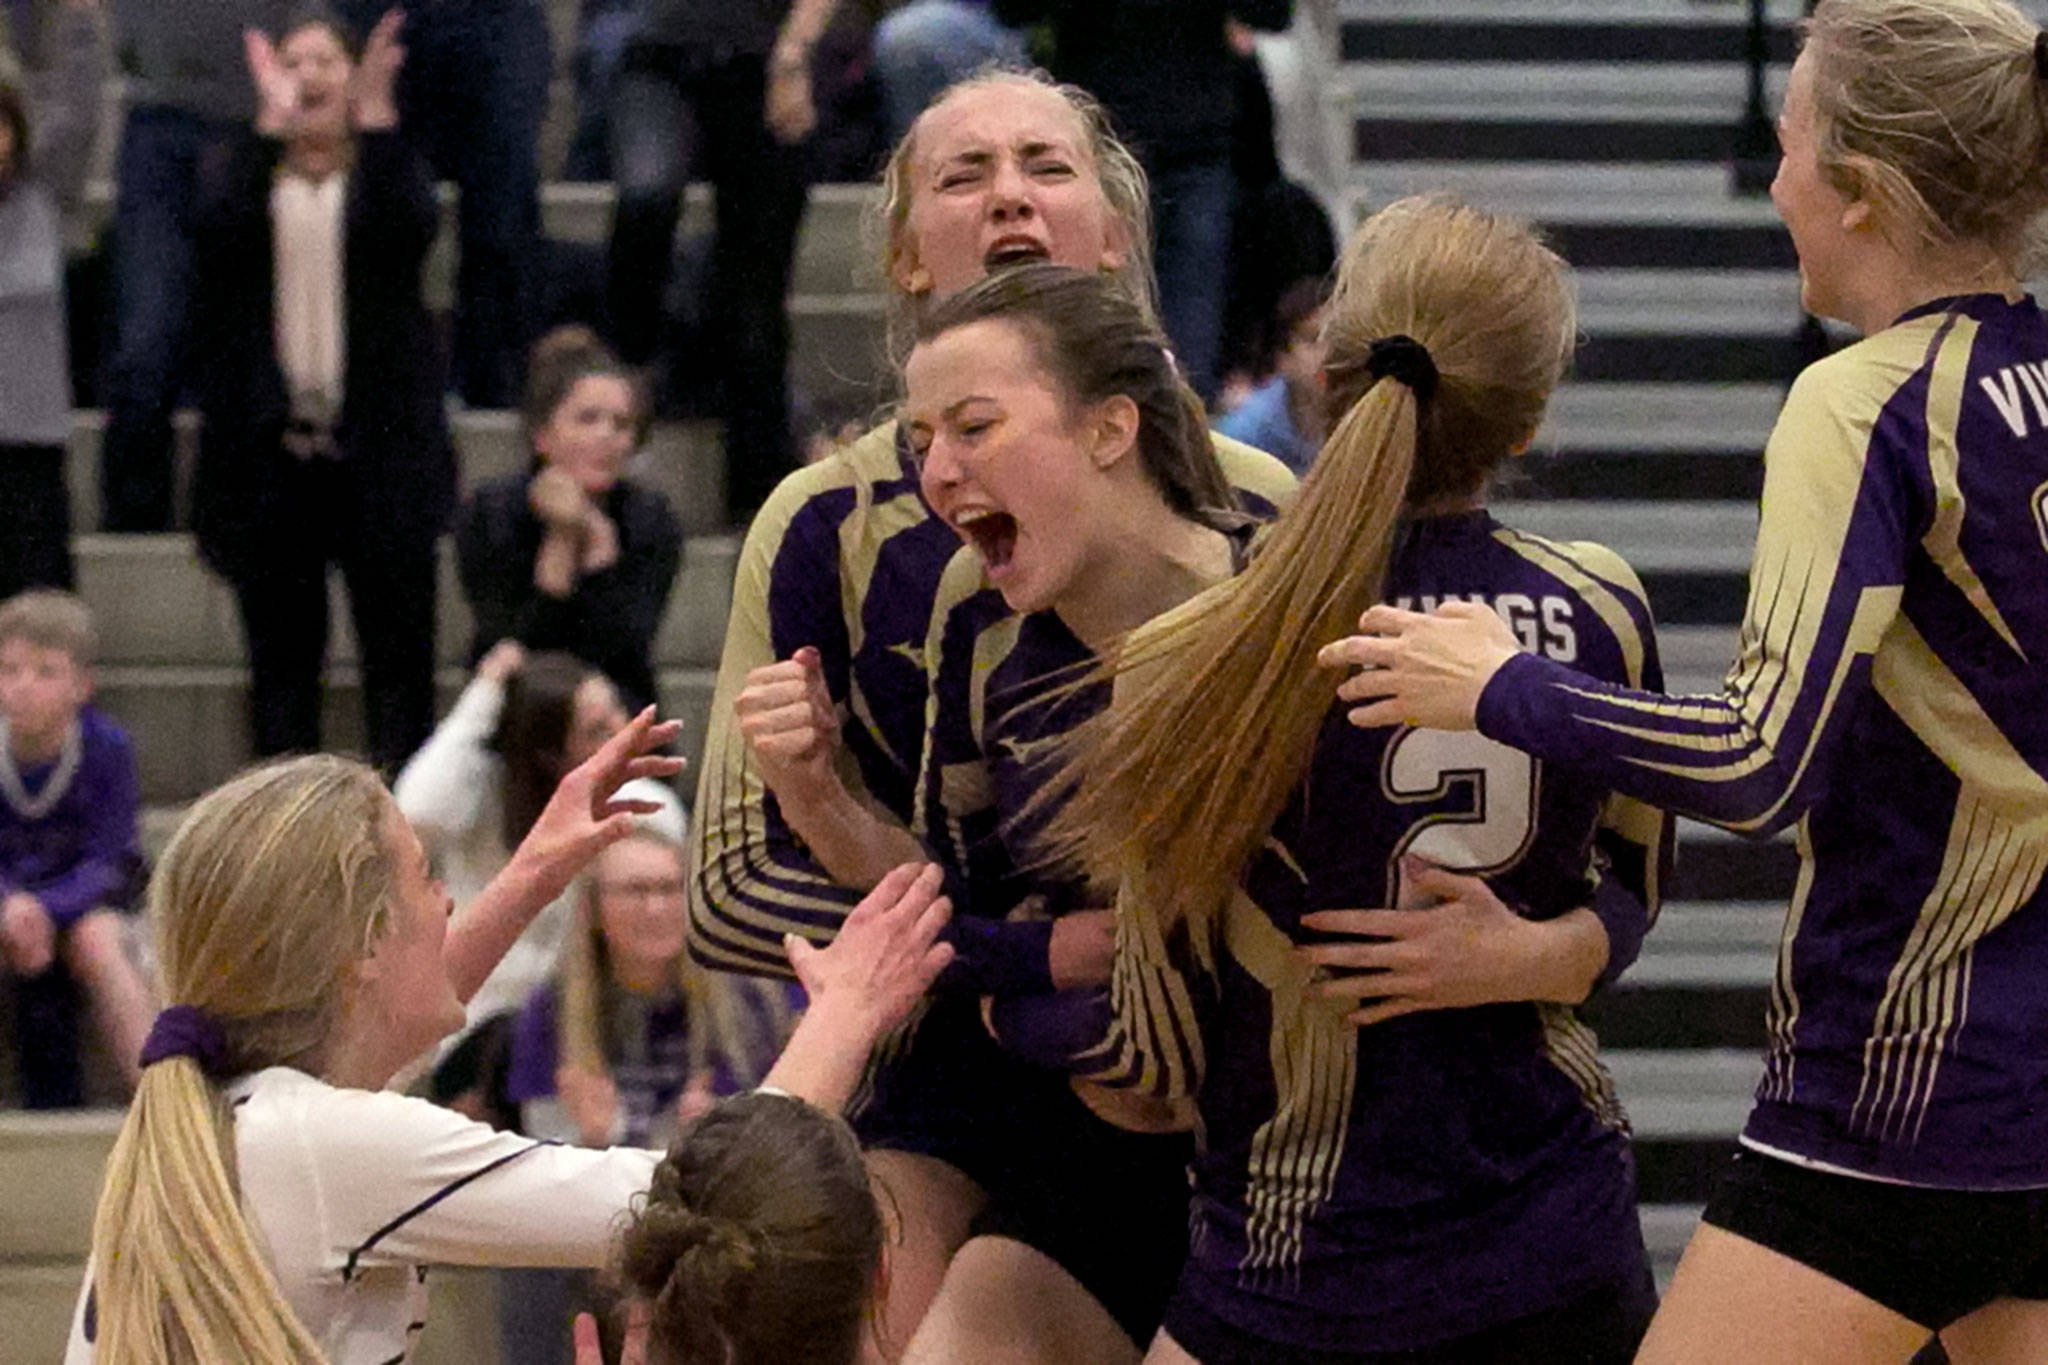 Lake Stevens players celebrate their 21-19 win in the fifth set against Issaquah during the Wes-King 4A District Tournament on Nov. 6, 2018, at Bothell High School. (Kevin Clark / The Herald)